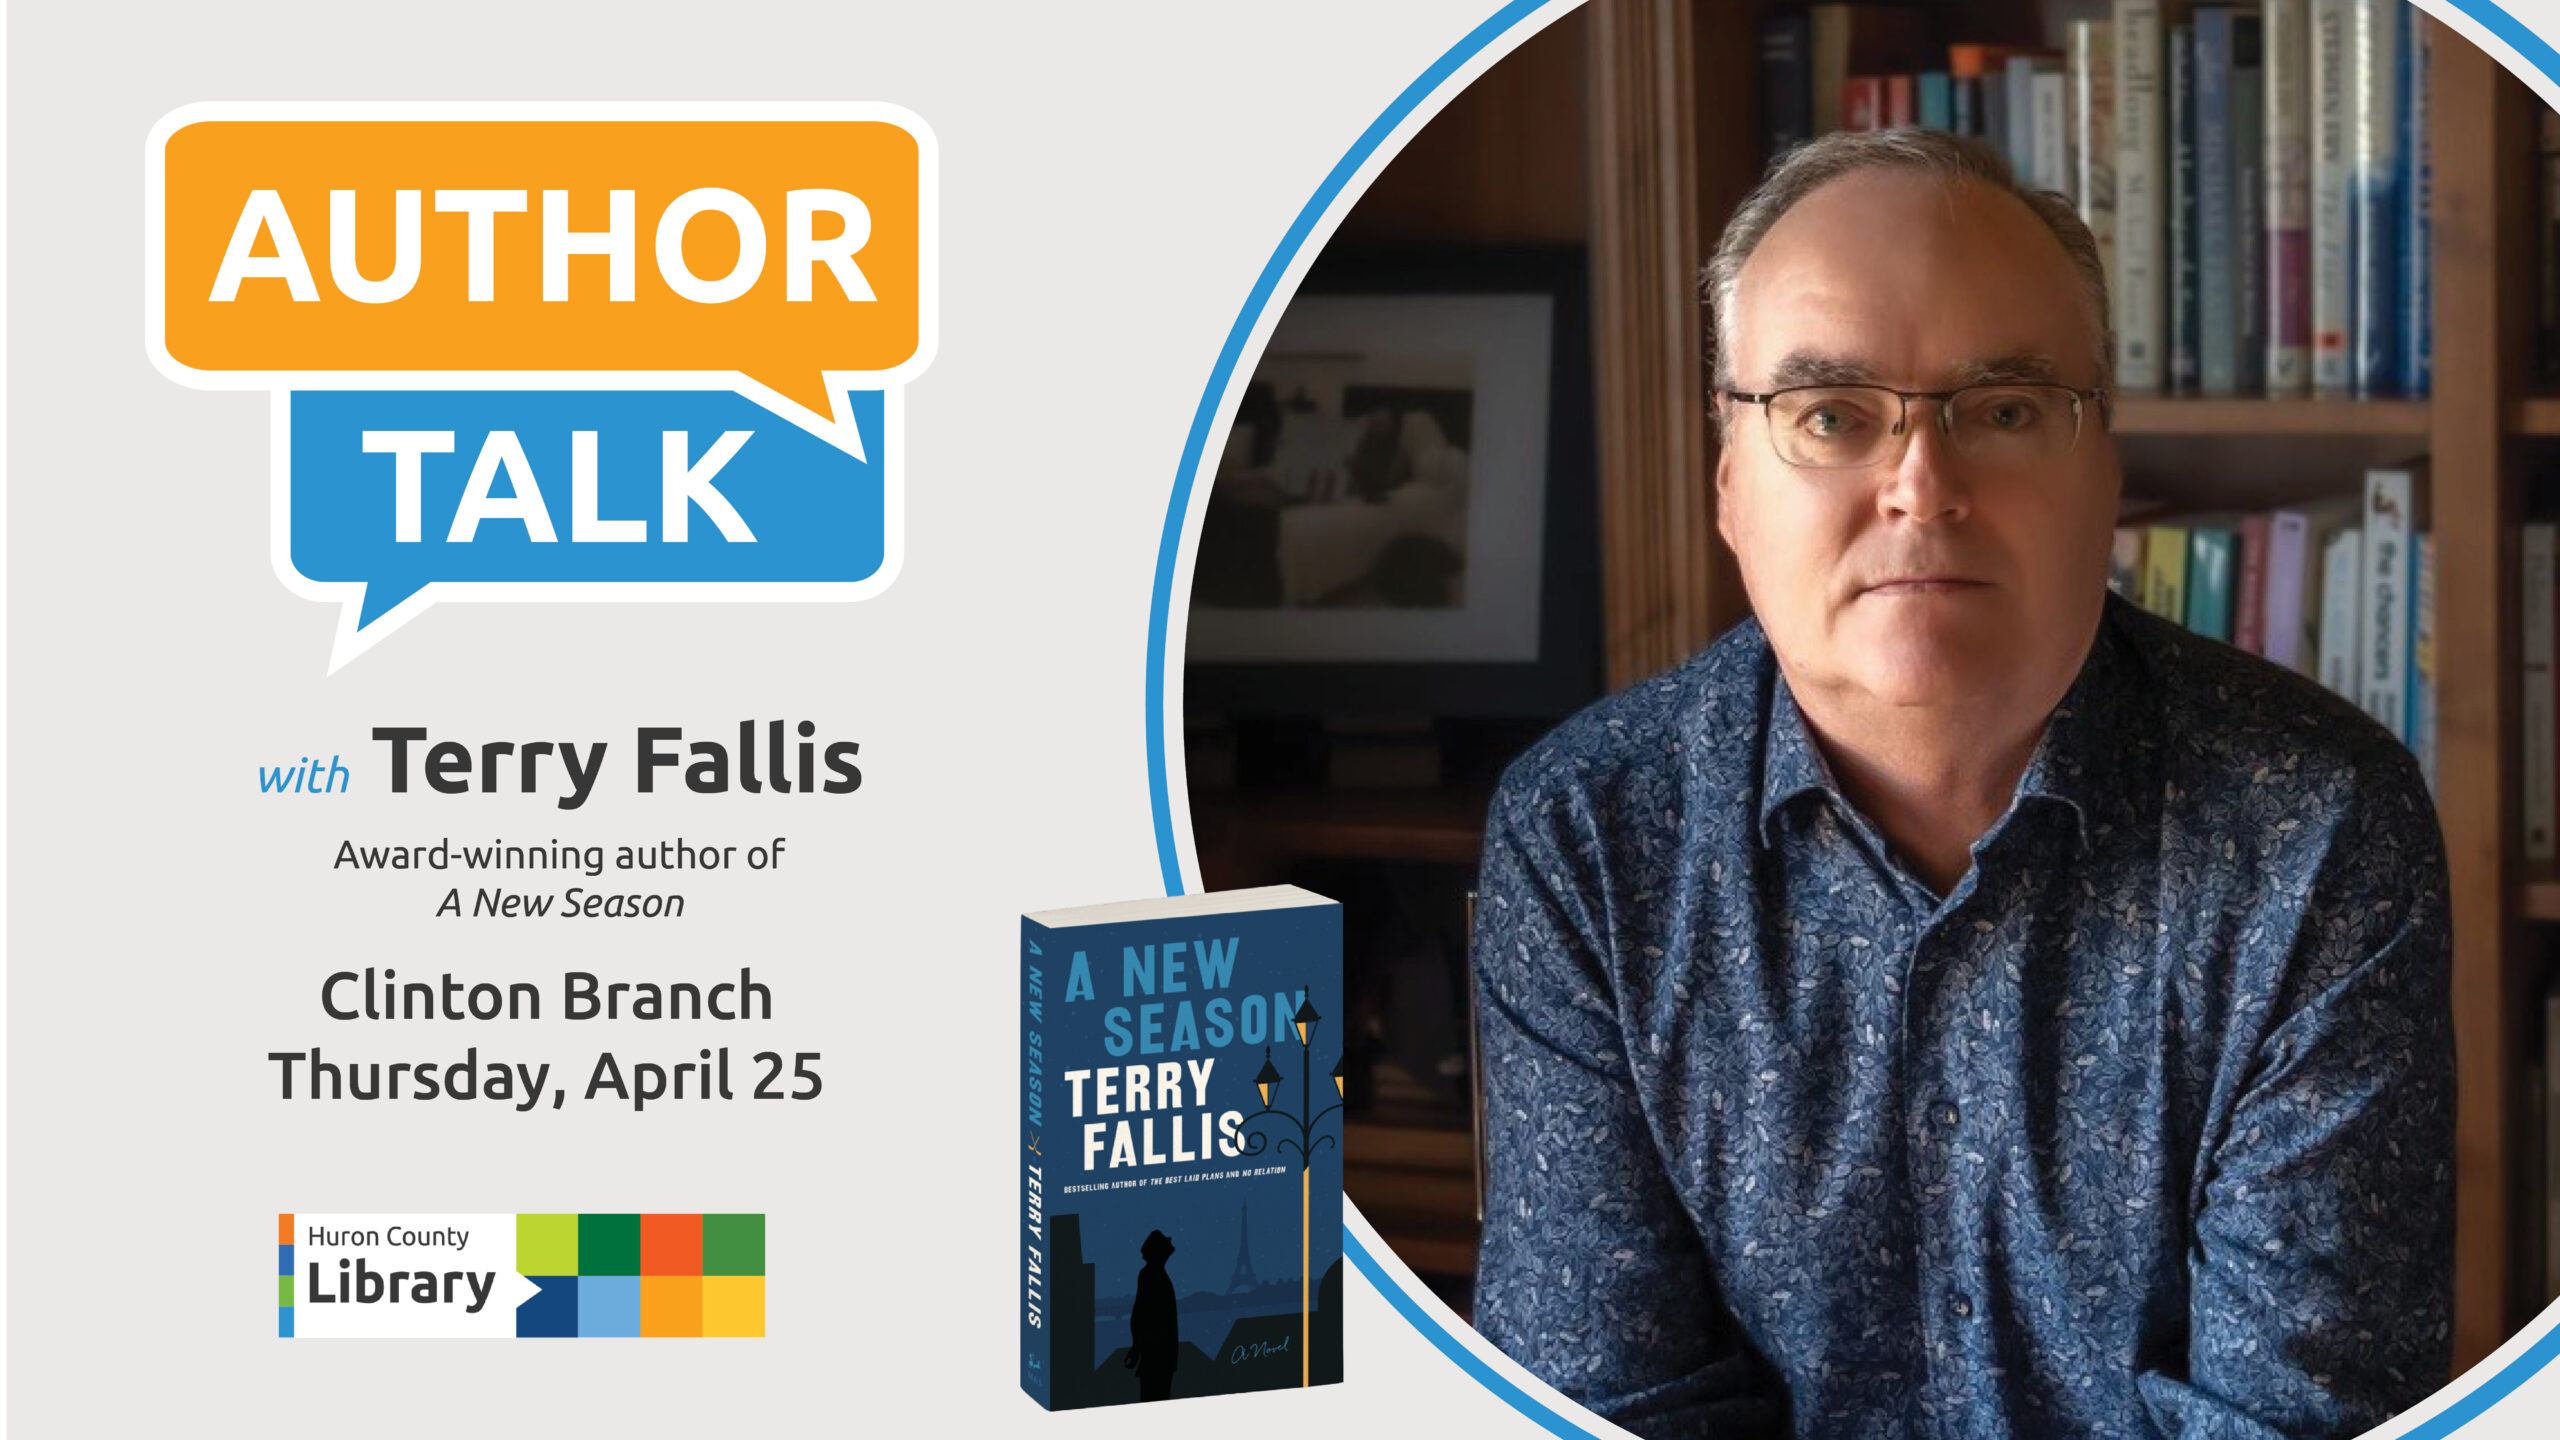 Photo of author Terry Fallis with text promoting author talk at Clinton branch